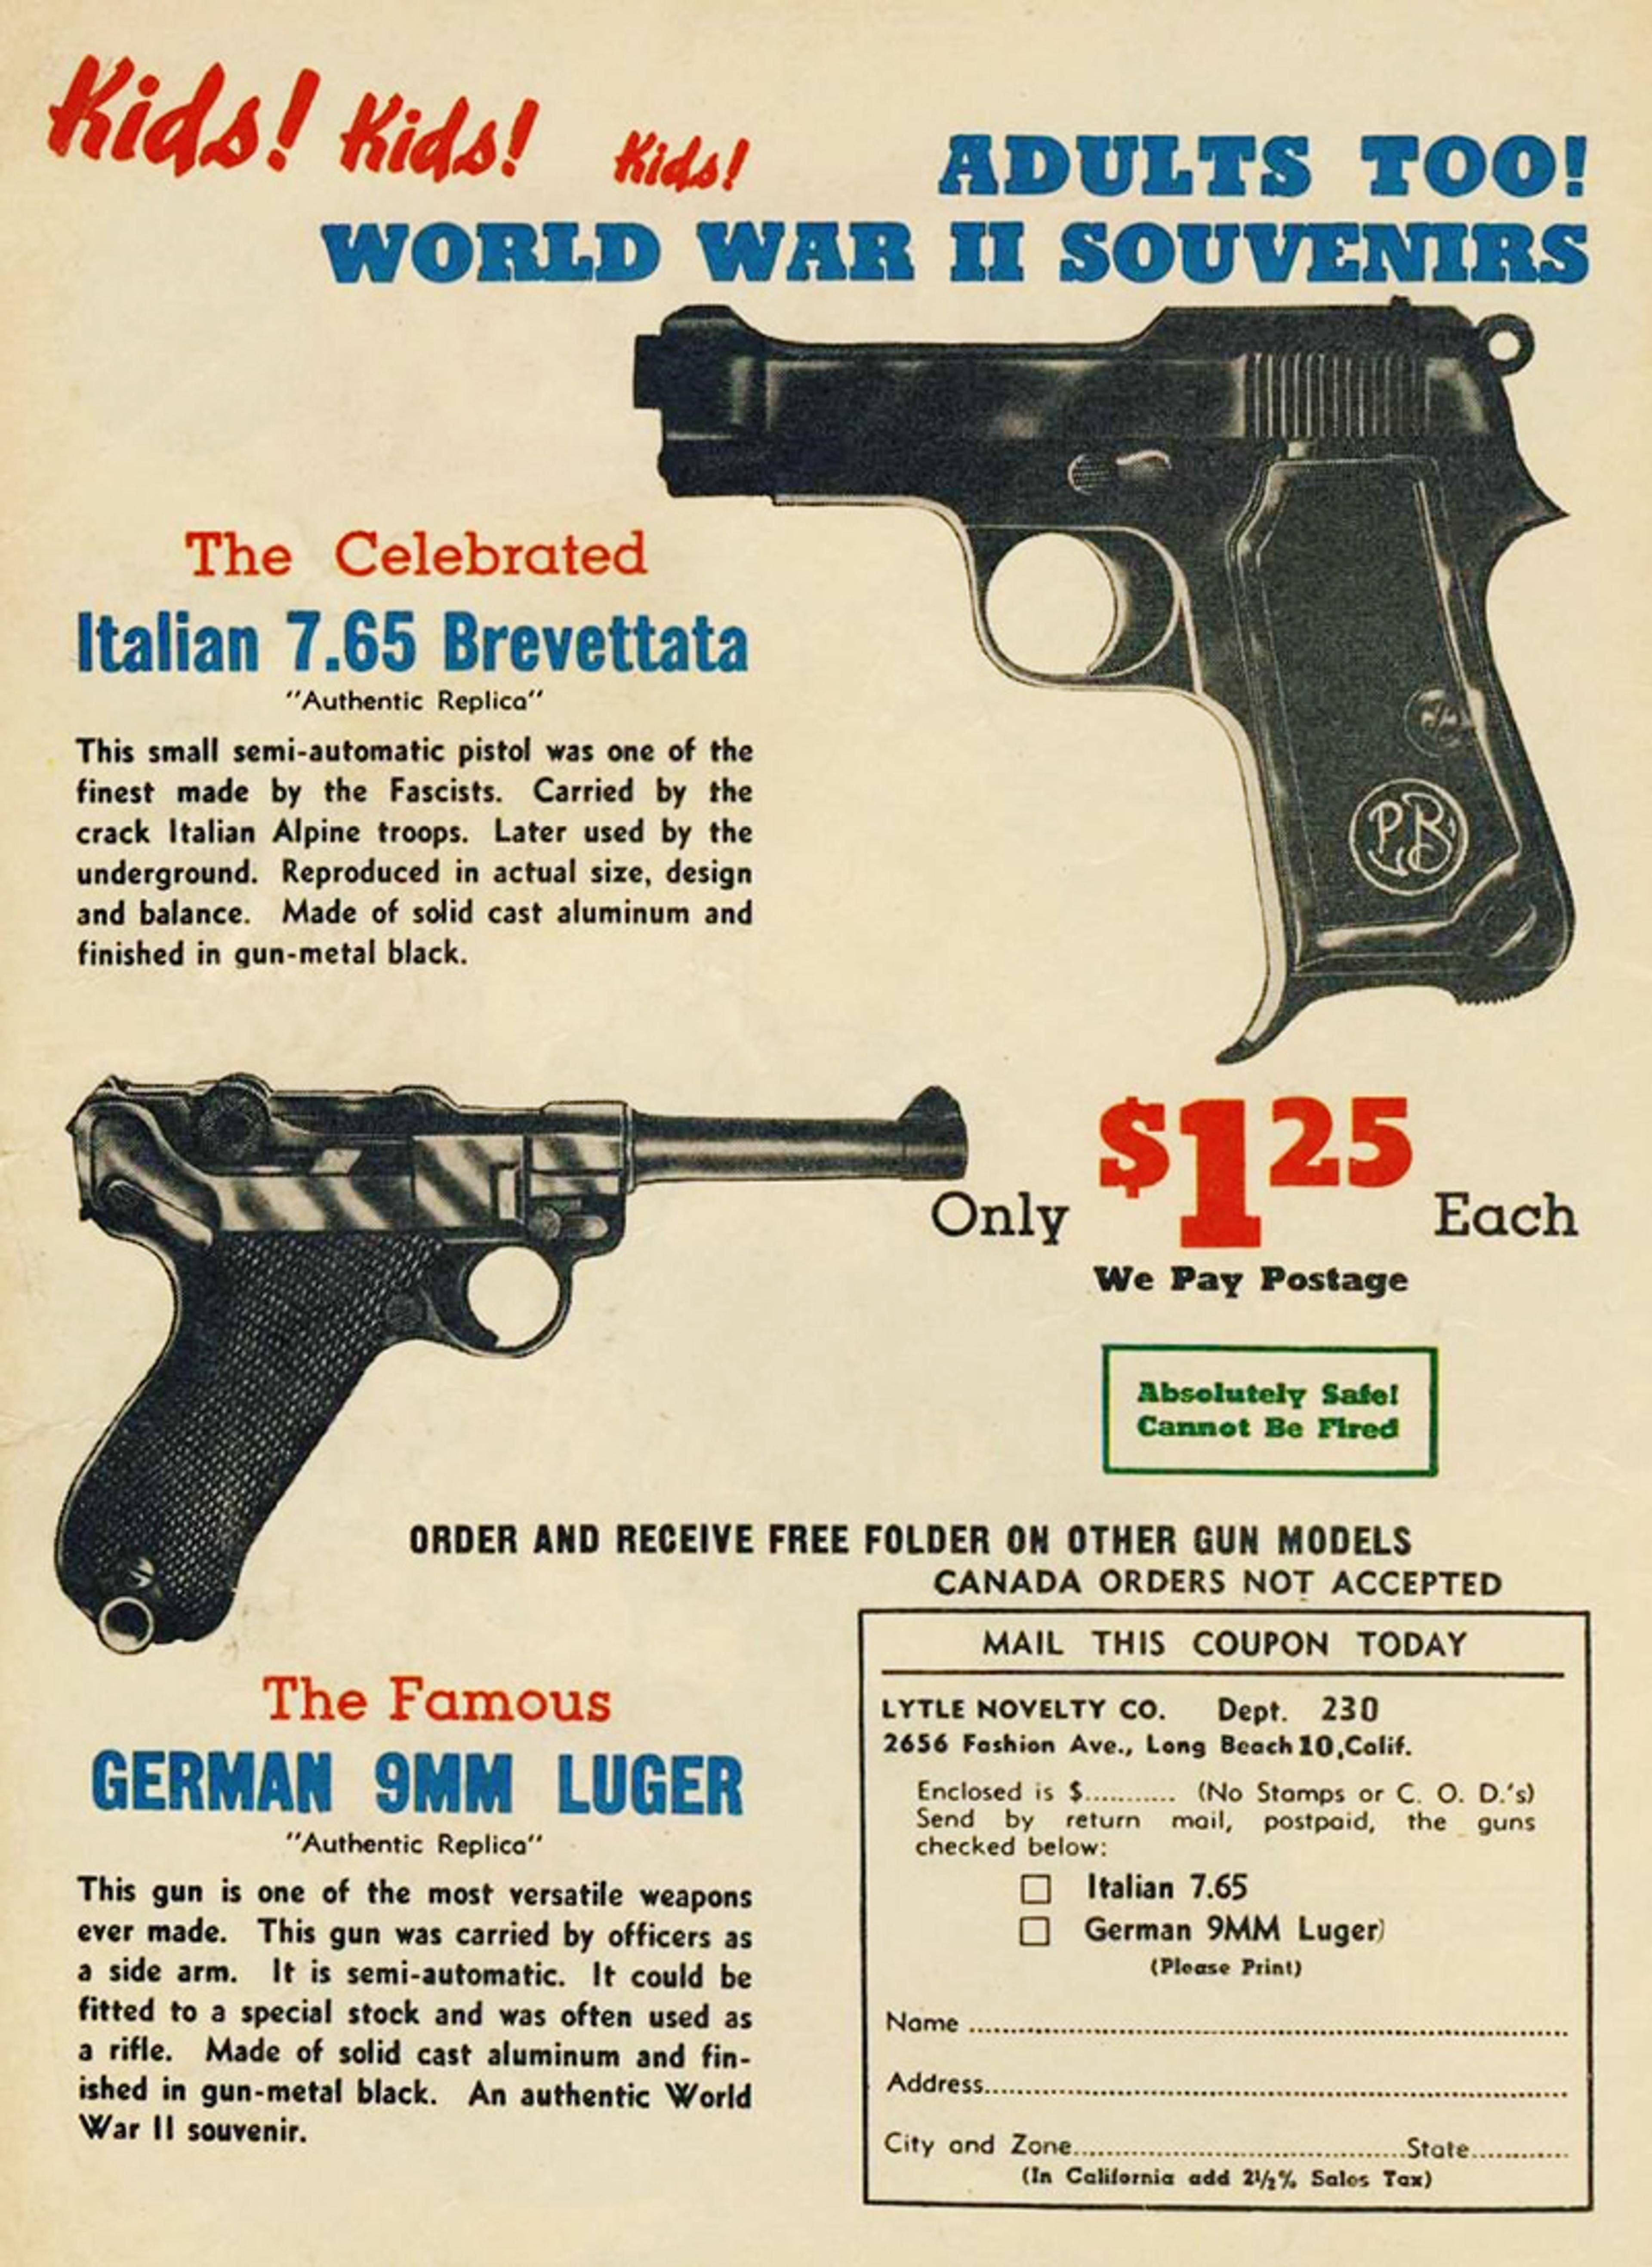 Vintage ad for World War II souvenir replica pistols: Italian 7.65 Brevettata or German 9mm Luger. Features illustrations, descriptions, and a $1.25 price each. Highlights “absolutely safe, cannot be fired” and includes an order form.  Bright and colourful design targeting both kids and adults.